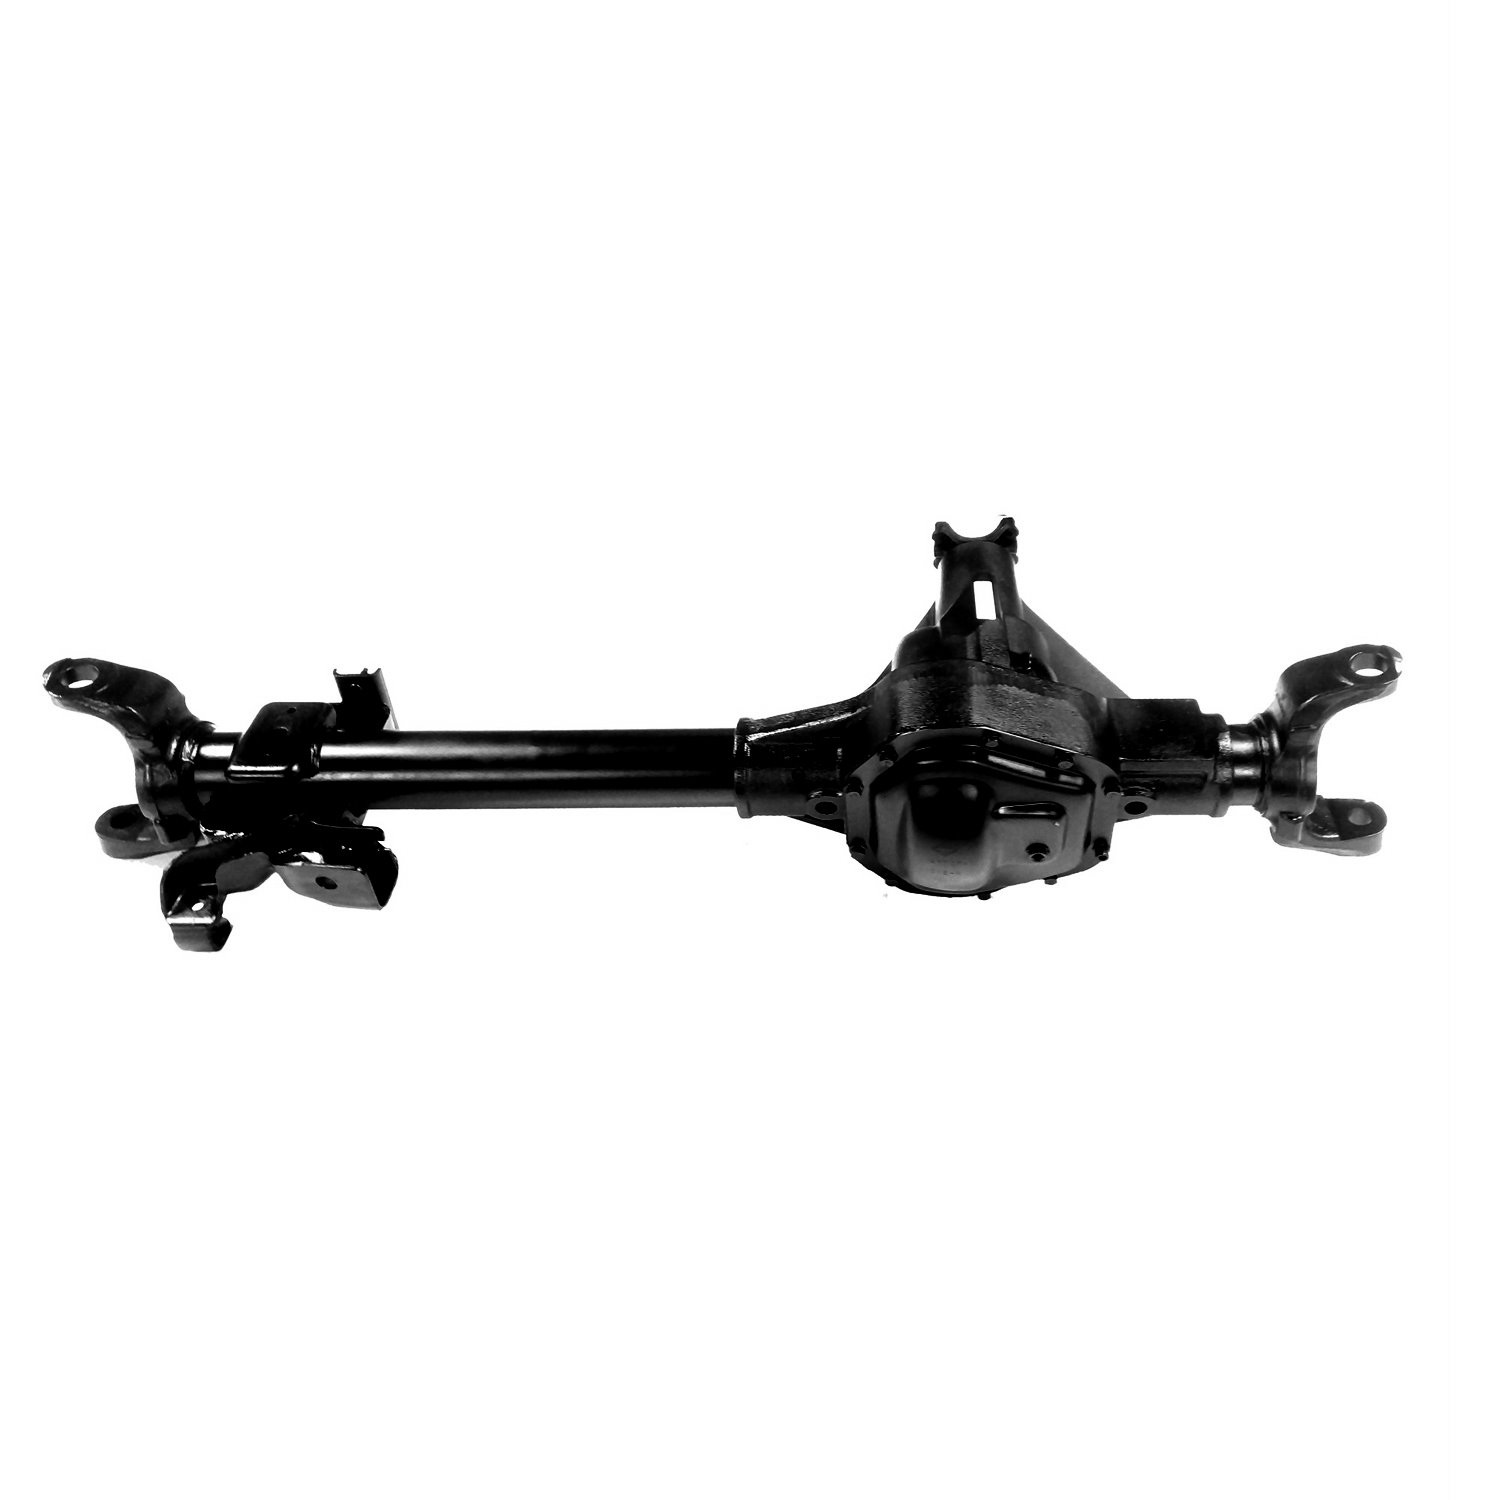 Remanufactured Complete Axle Assembly for Dana 60 08-10 Ford F250 & F350 3.55 Ratio, SRW